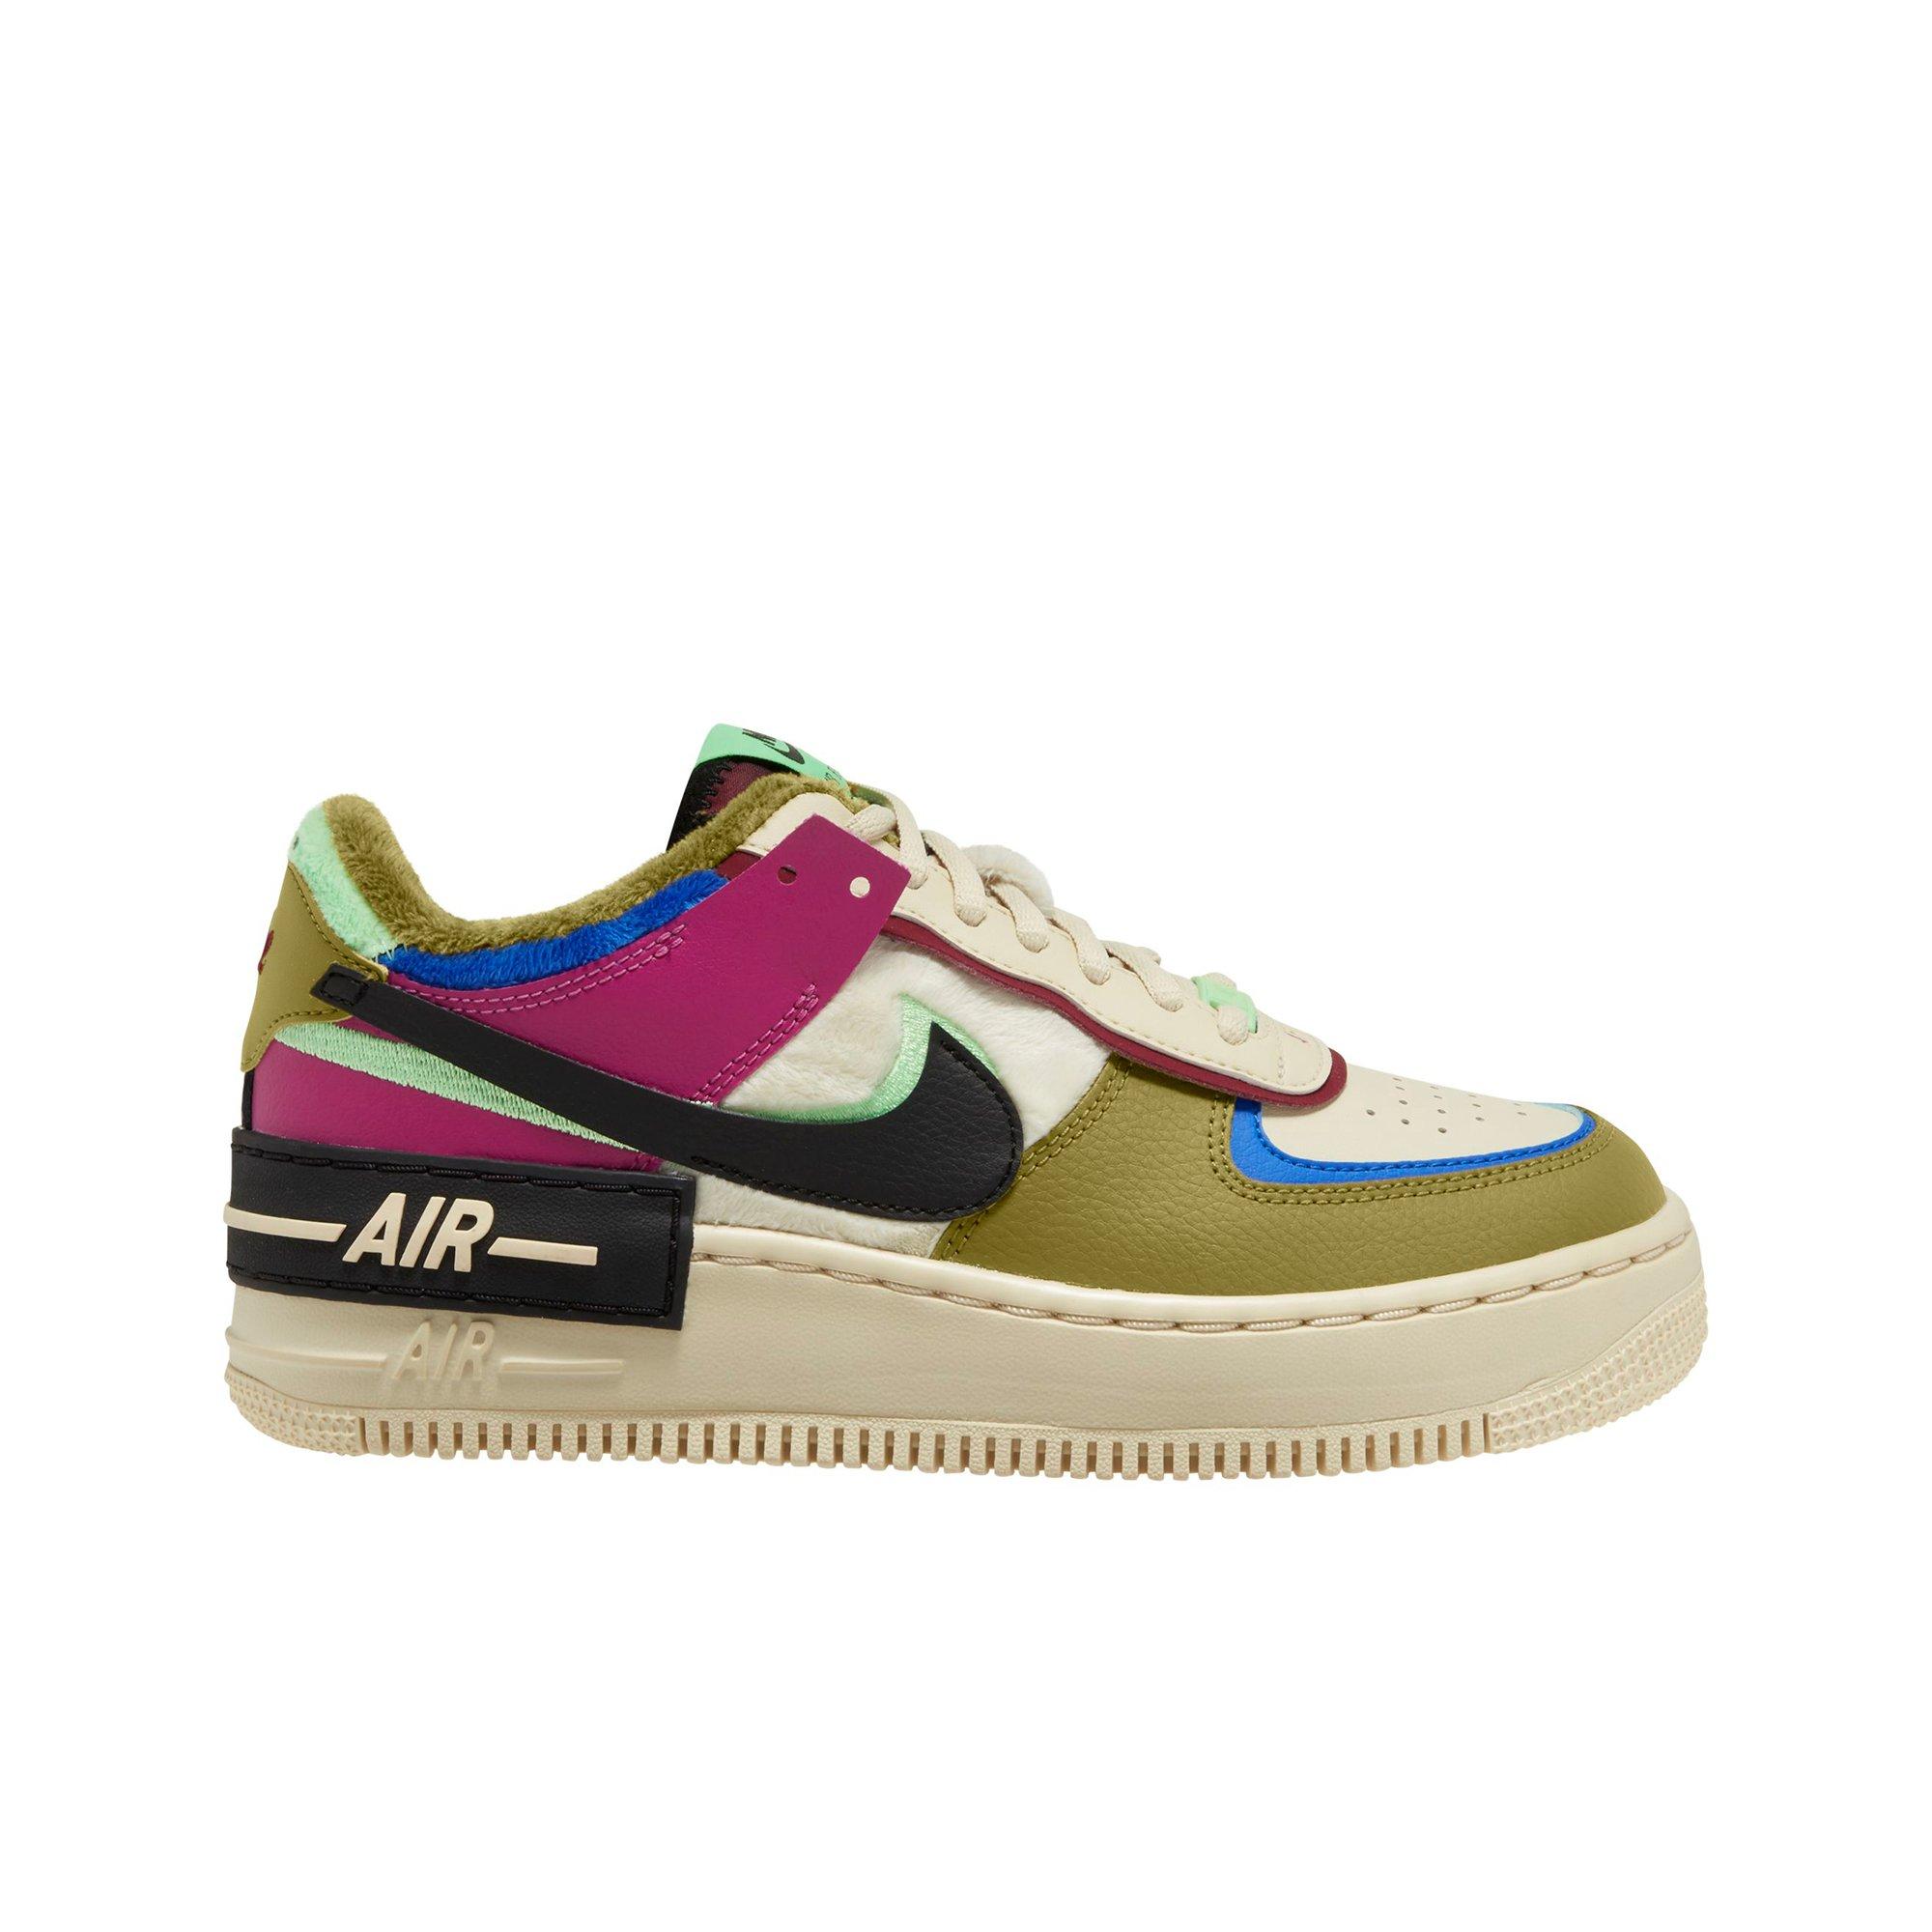 nike air force 1 shadow women's size 8